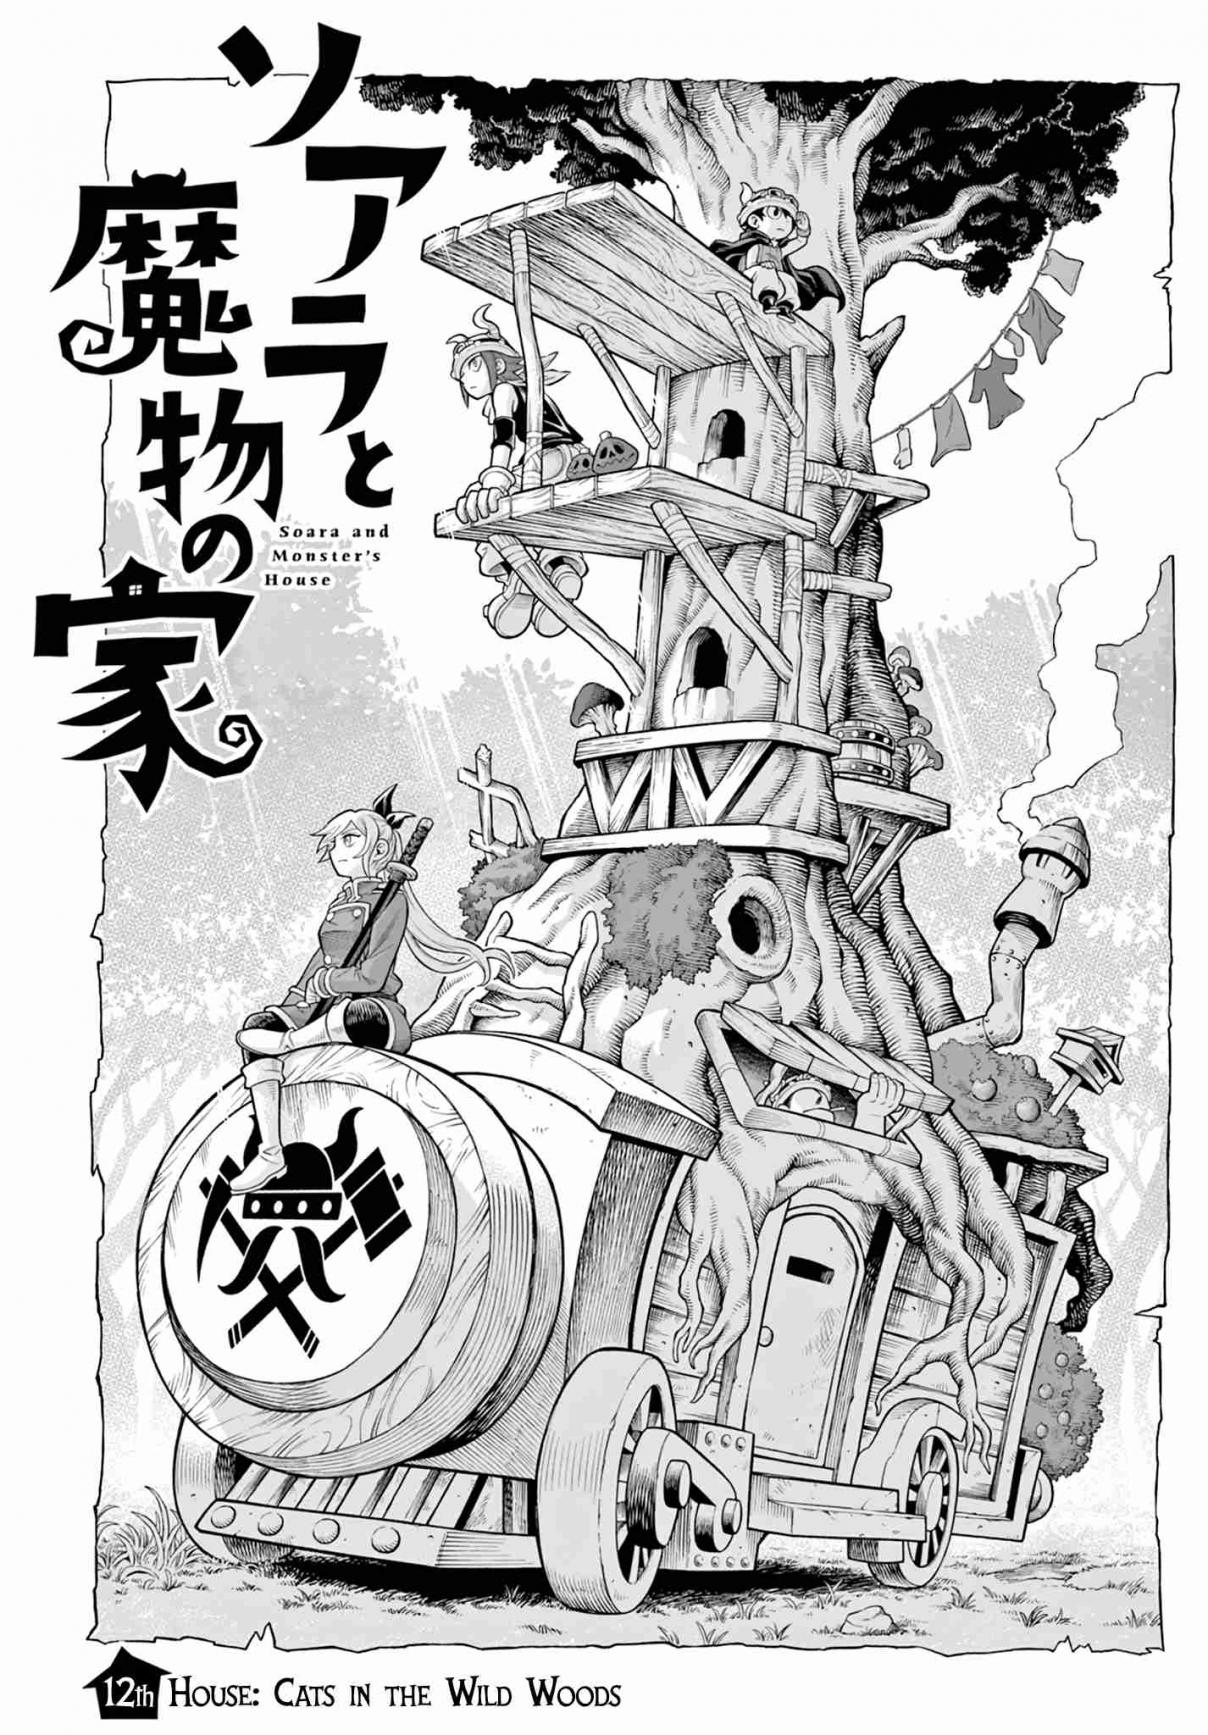 Soara and the Monster's House 12